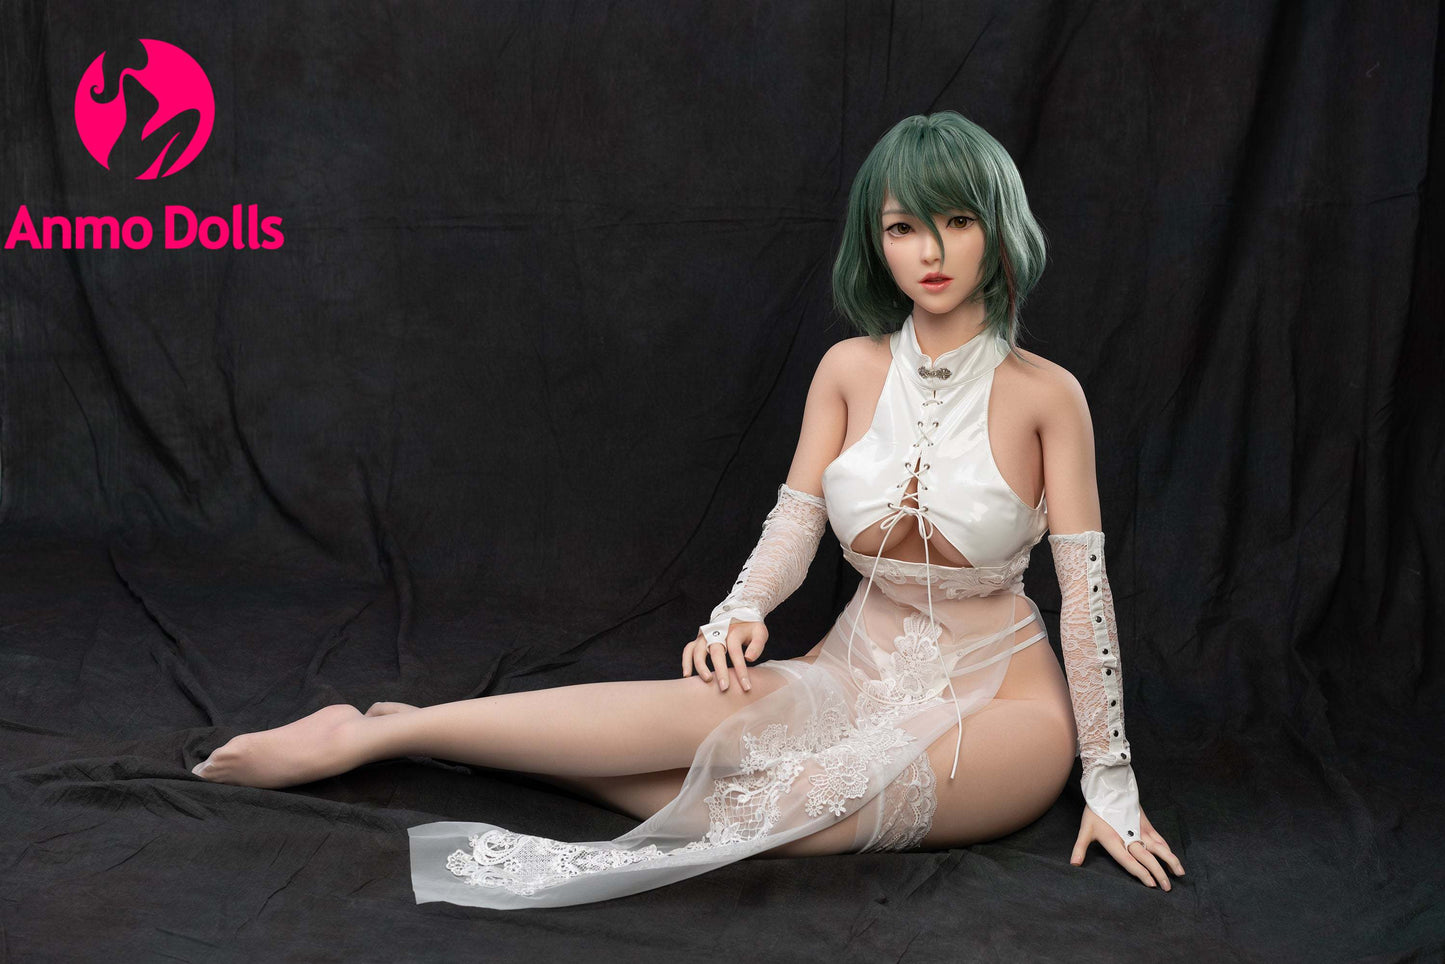 Dylan - Superb amateur Asian Silicone Sex Doll by Anmodolls